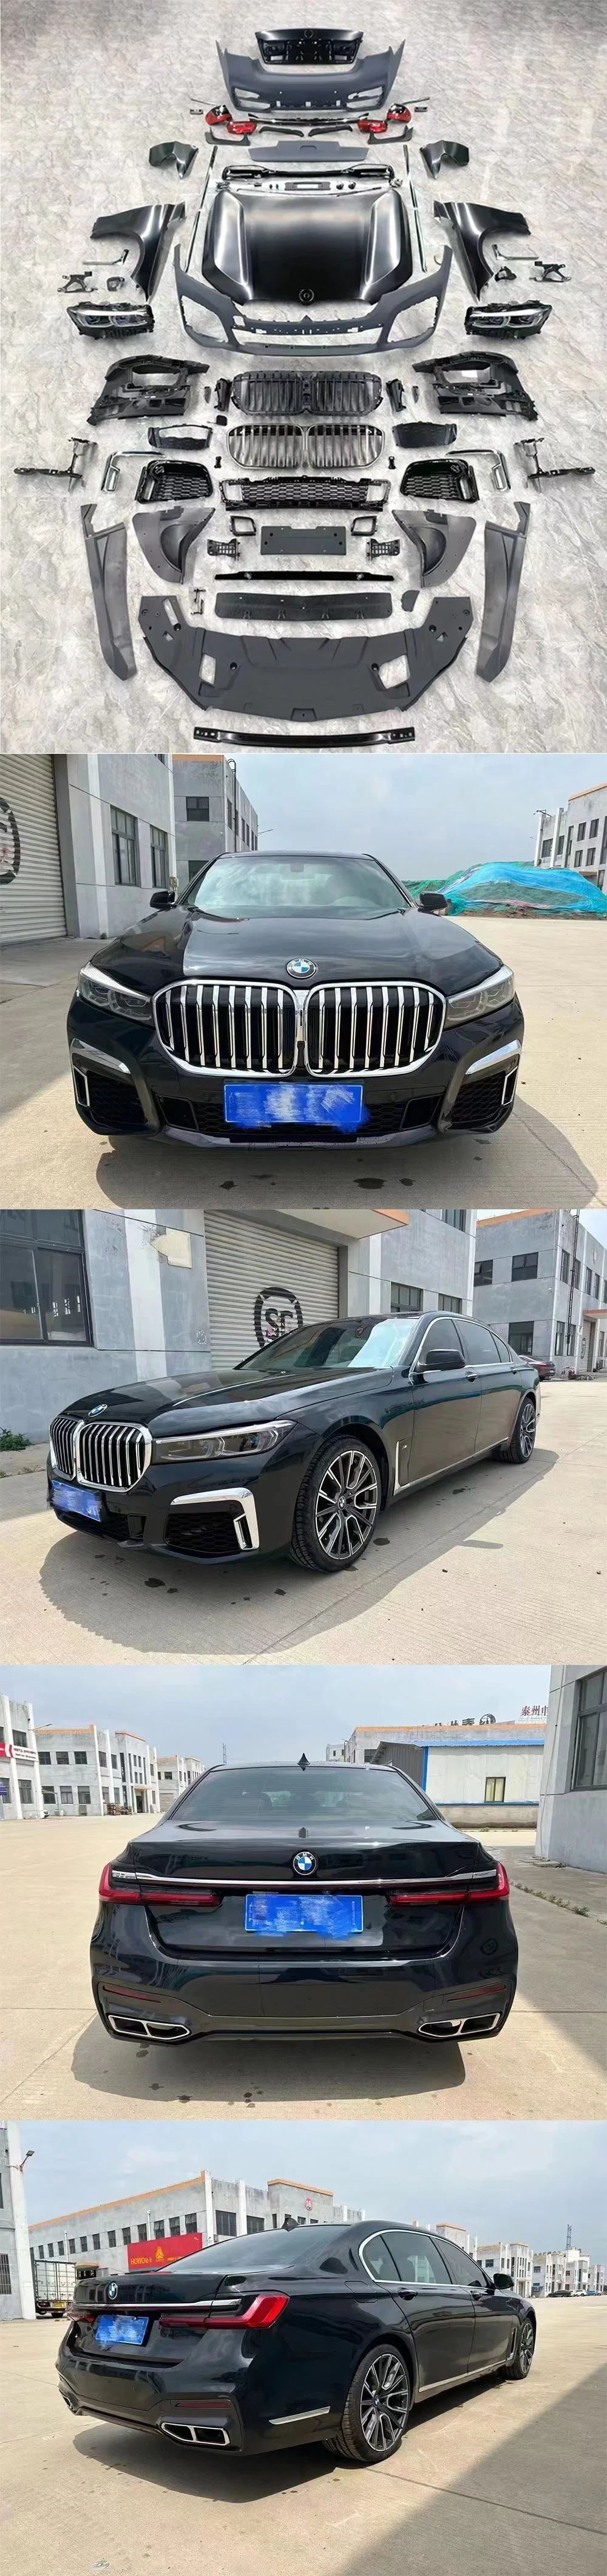 for BMW 7 Series F02 (09-15) Boykit Upgrated and Modified G12 Lci Sport Version Full Bodykit with Front Bumper Rear Bumper Headlights